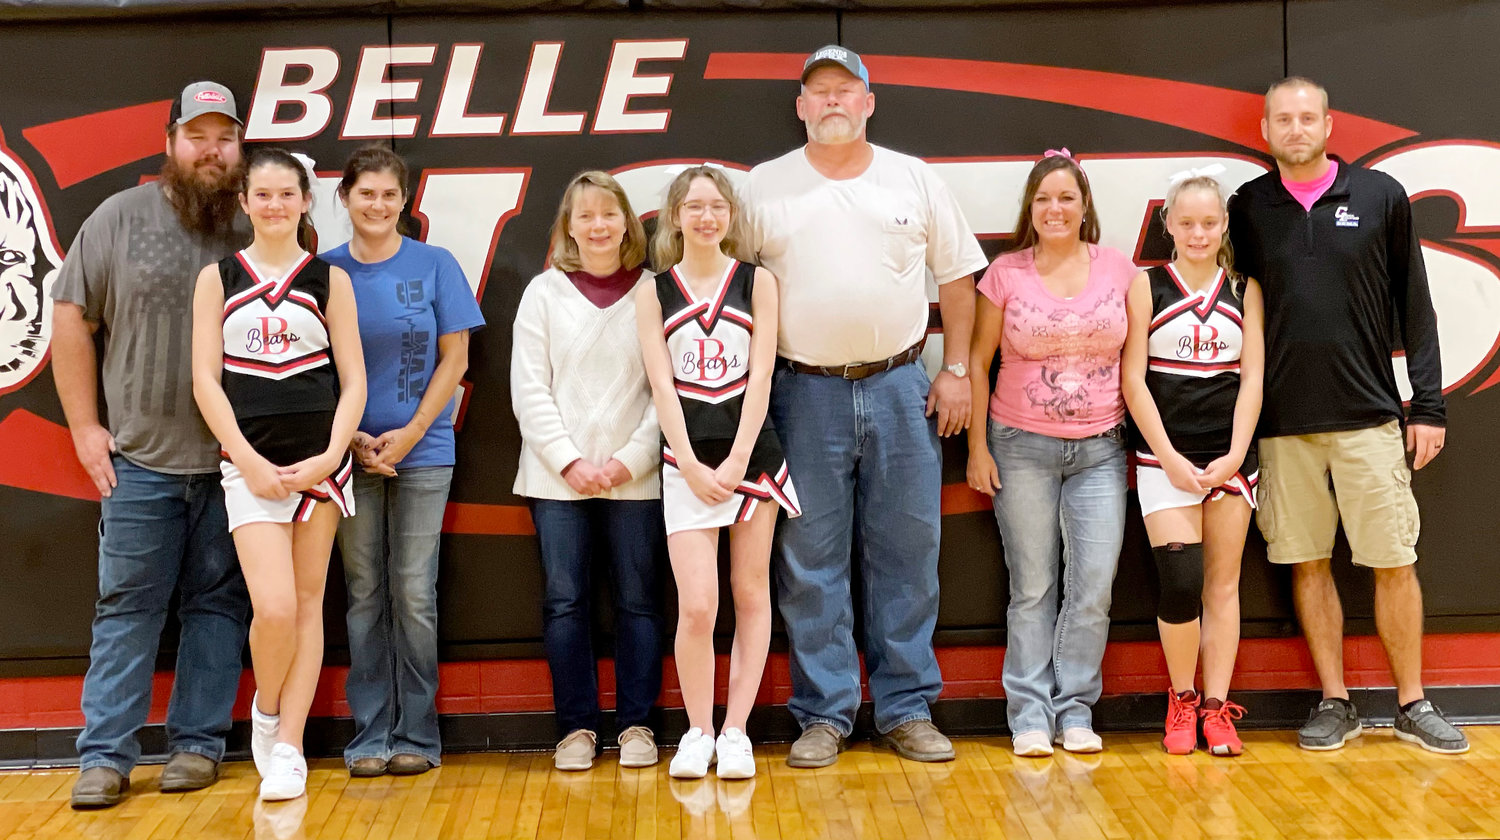 Eighth-grade cheerleaders were recognized prior to the eighth-grade boys basketball game Friday night at Belle High School between Bland and Vienna.